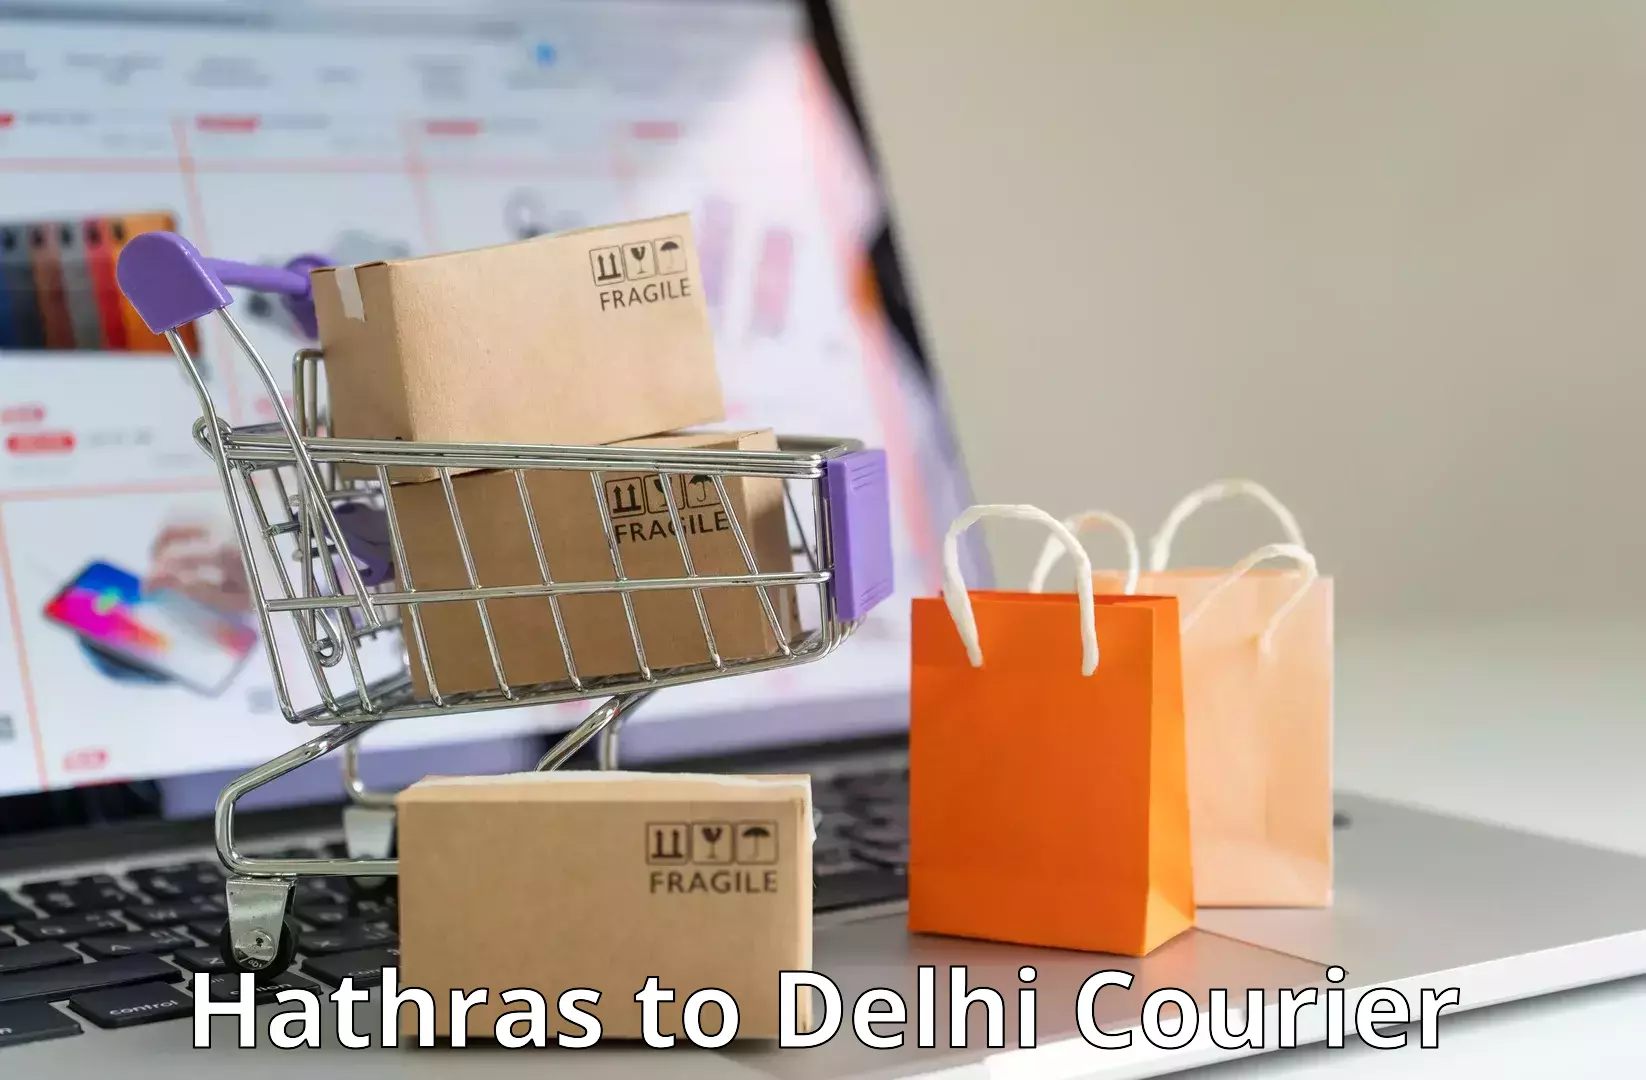 User-friendly delivery service in Hathras to East Delhi